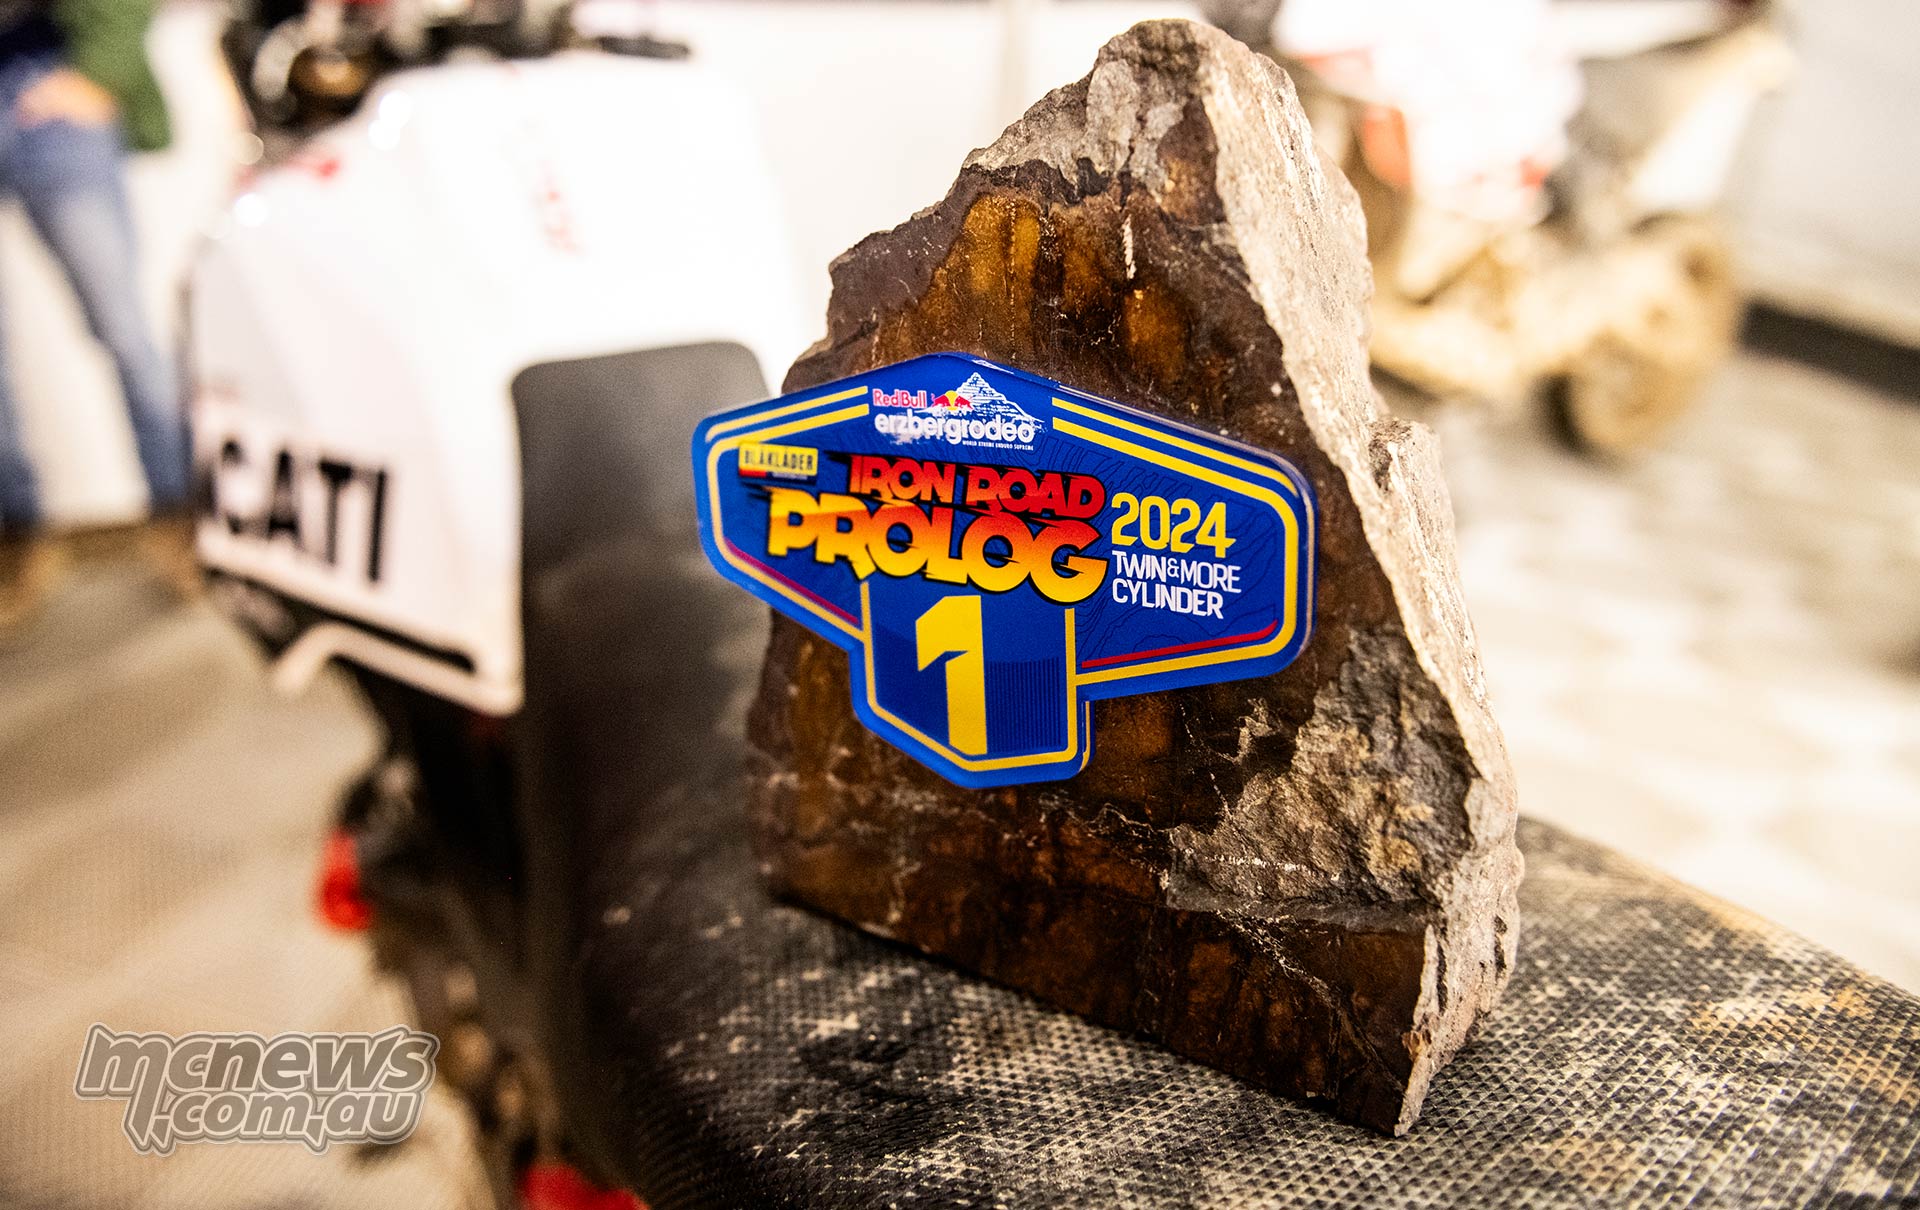 The Ducati DesertX Rally wins the Iron Road Prologue